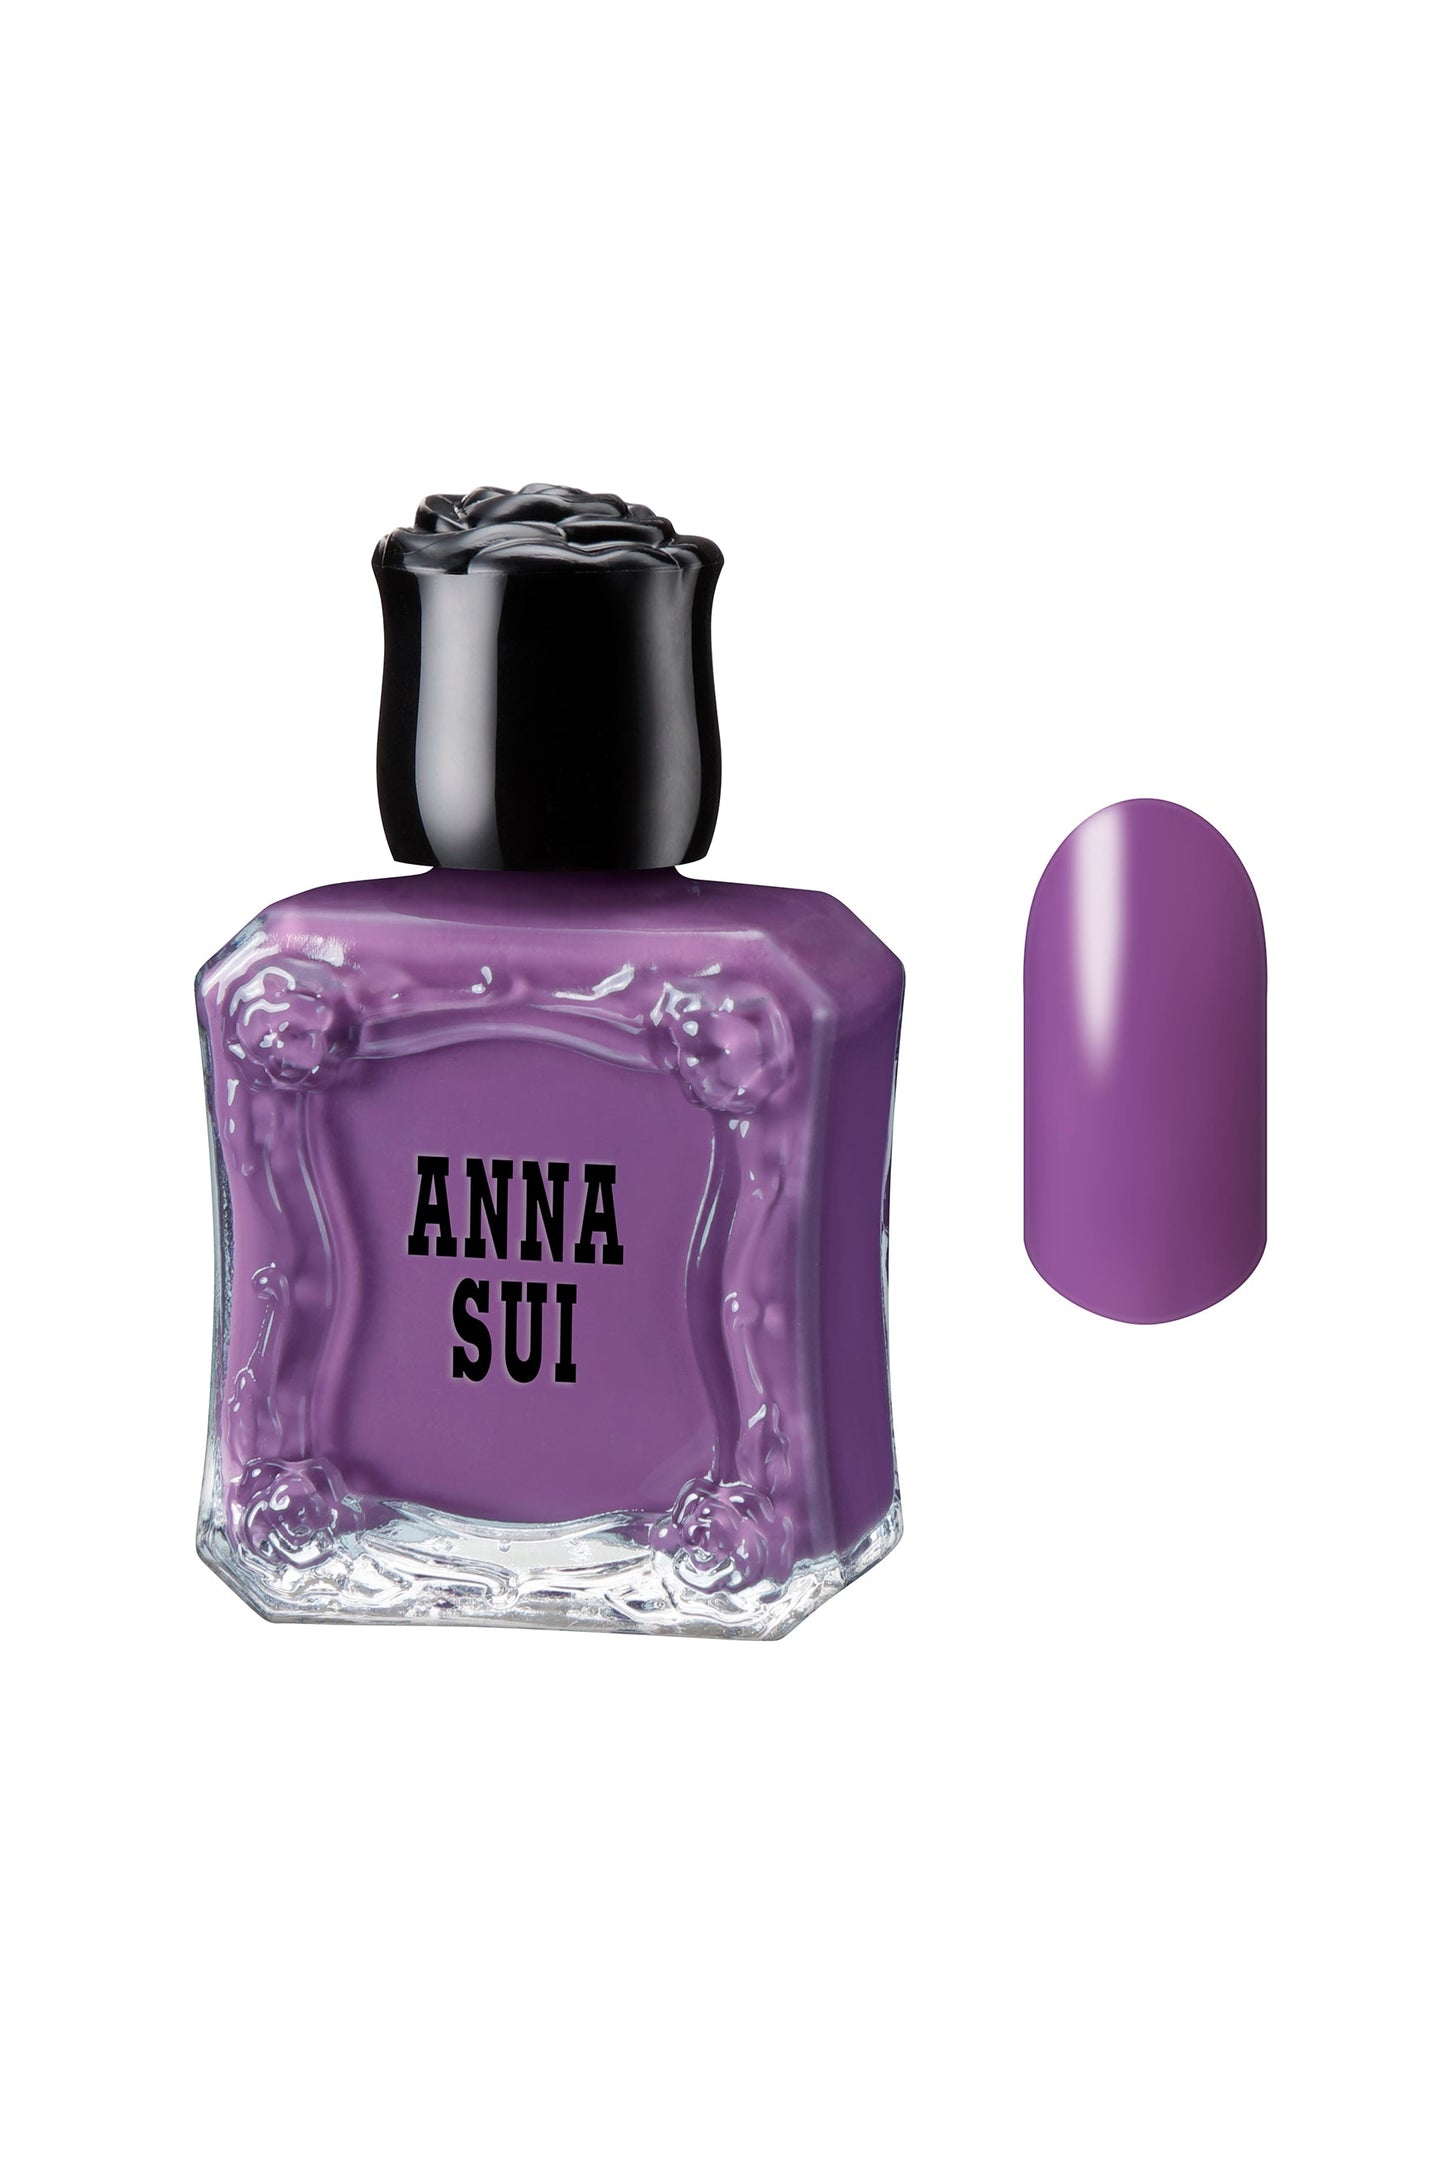 LILAC: Glass bottle, black cap rose shape, with Anna Sui floral design and label